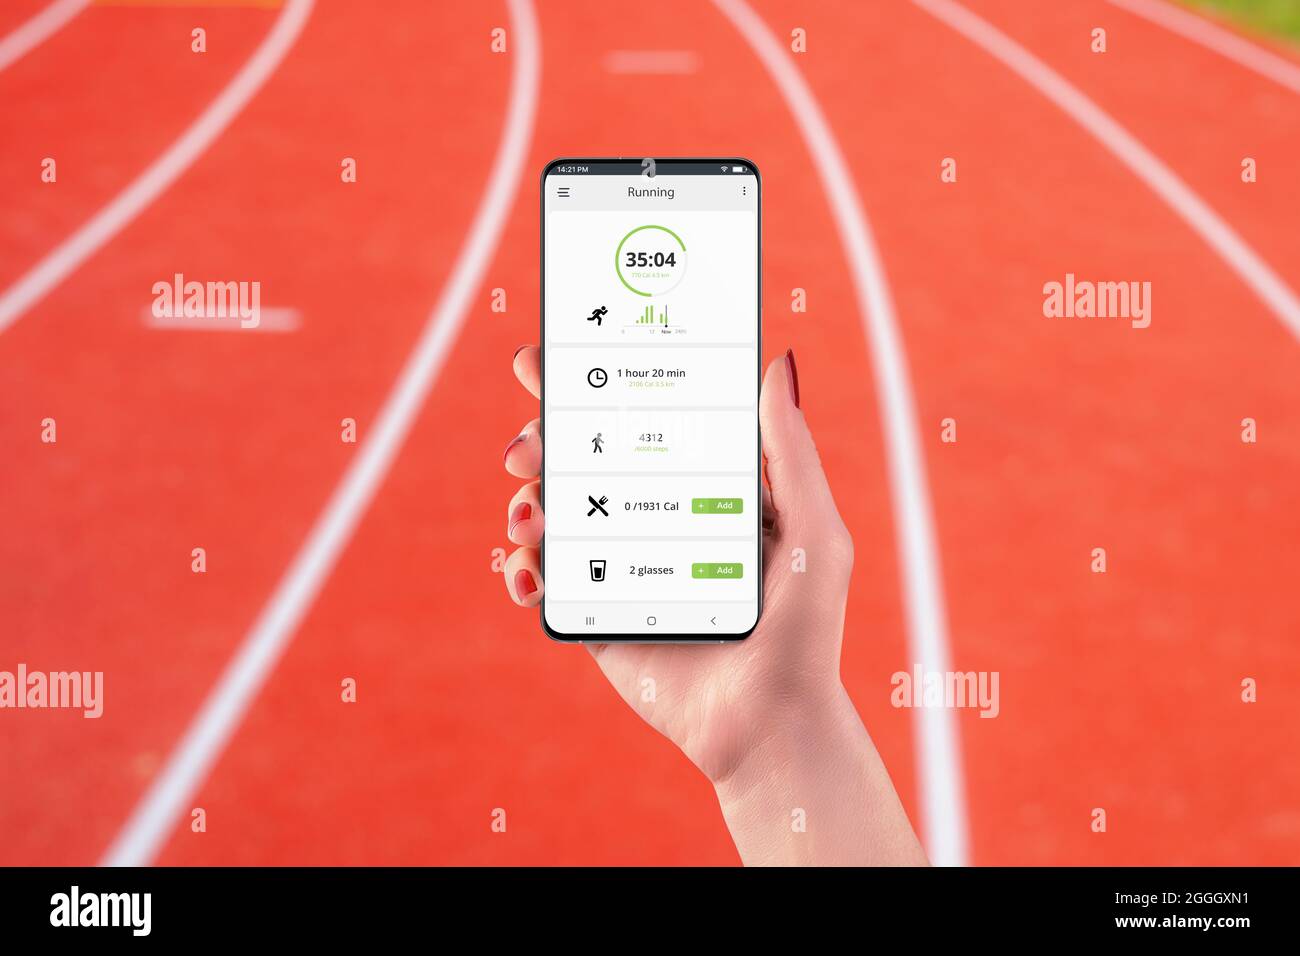 Running app interface on smart phone in woman hjand. Running steps counter with health analytics. Athletic track in the background Stock Photo